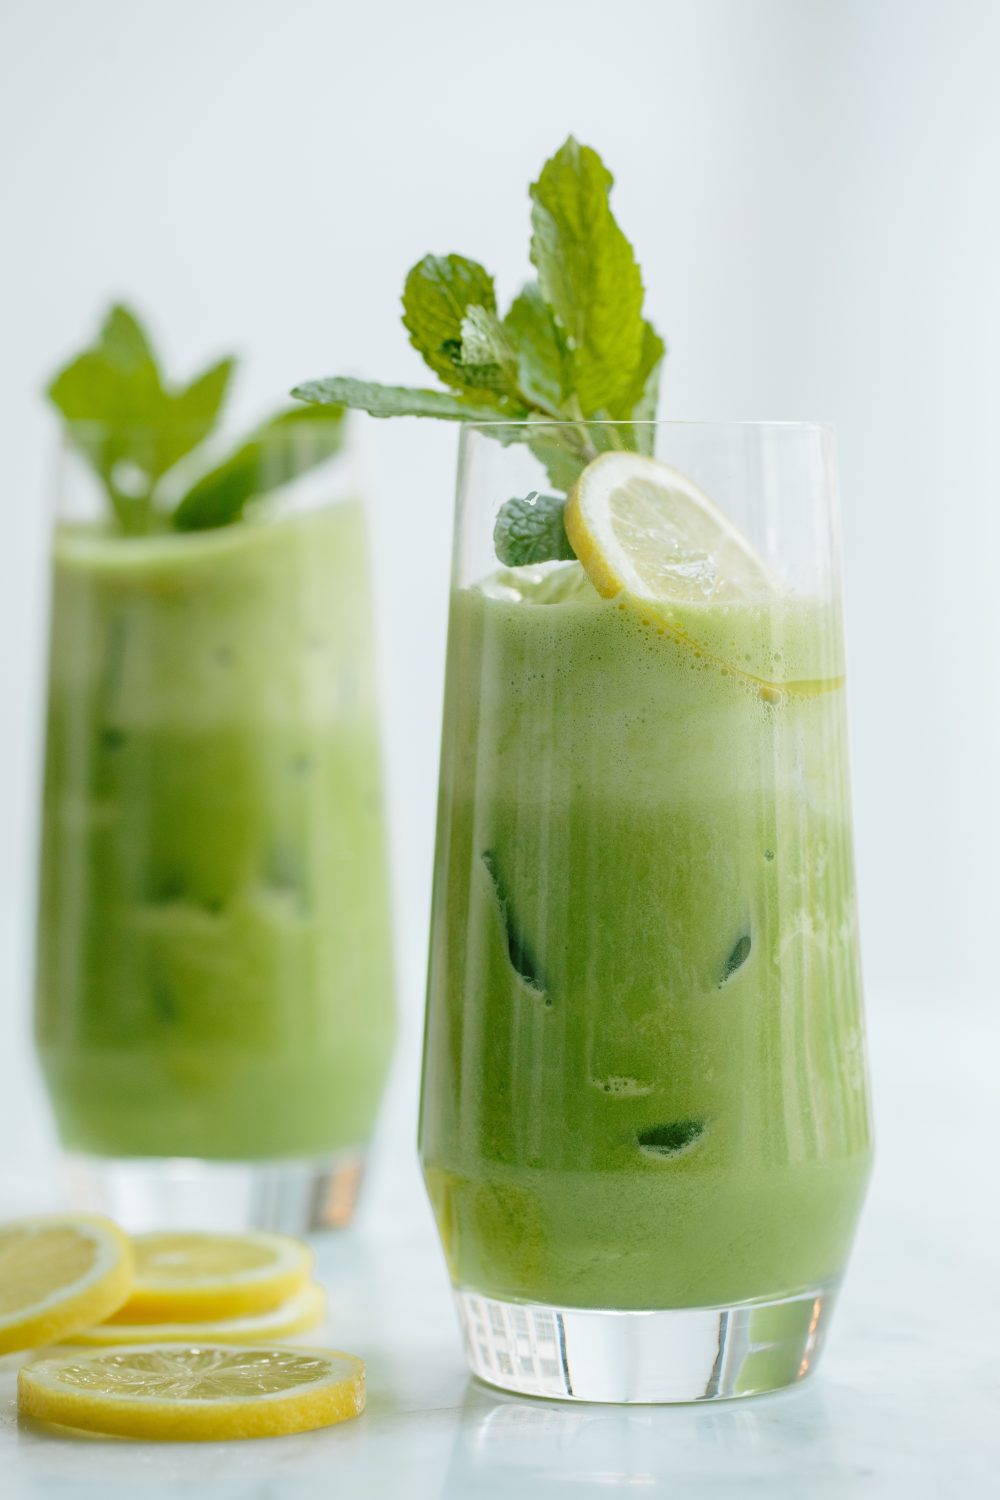 In Cario, cool drinks blend mint and lemon.